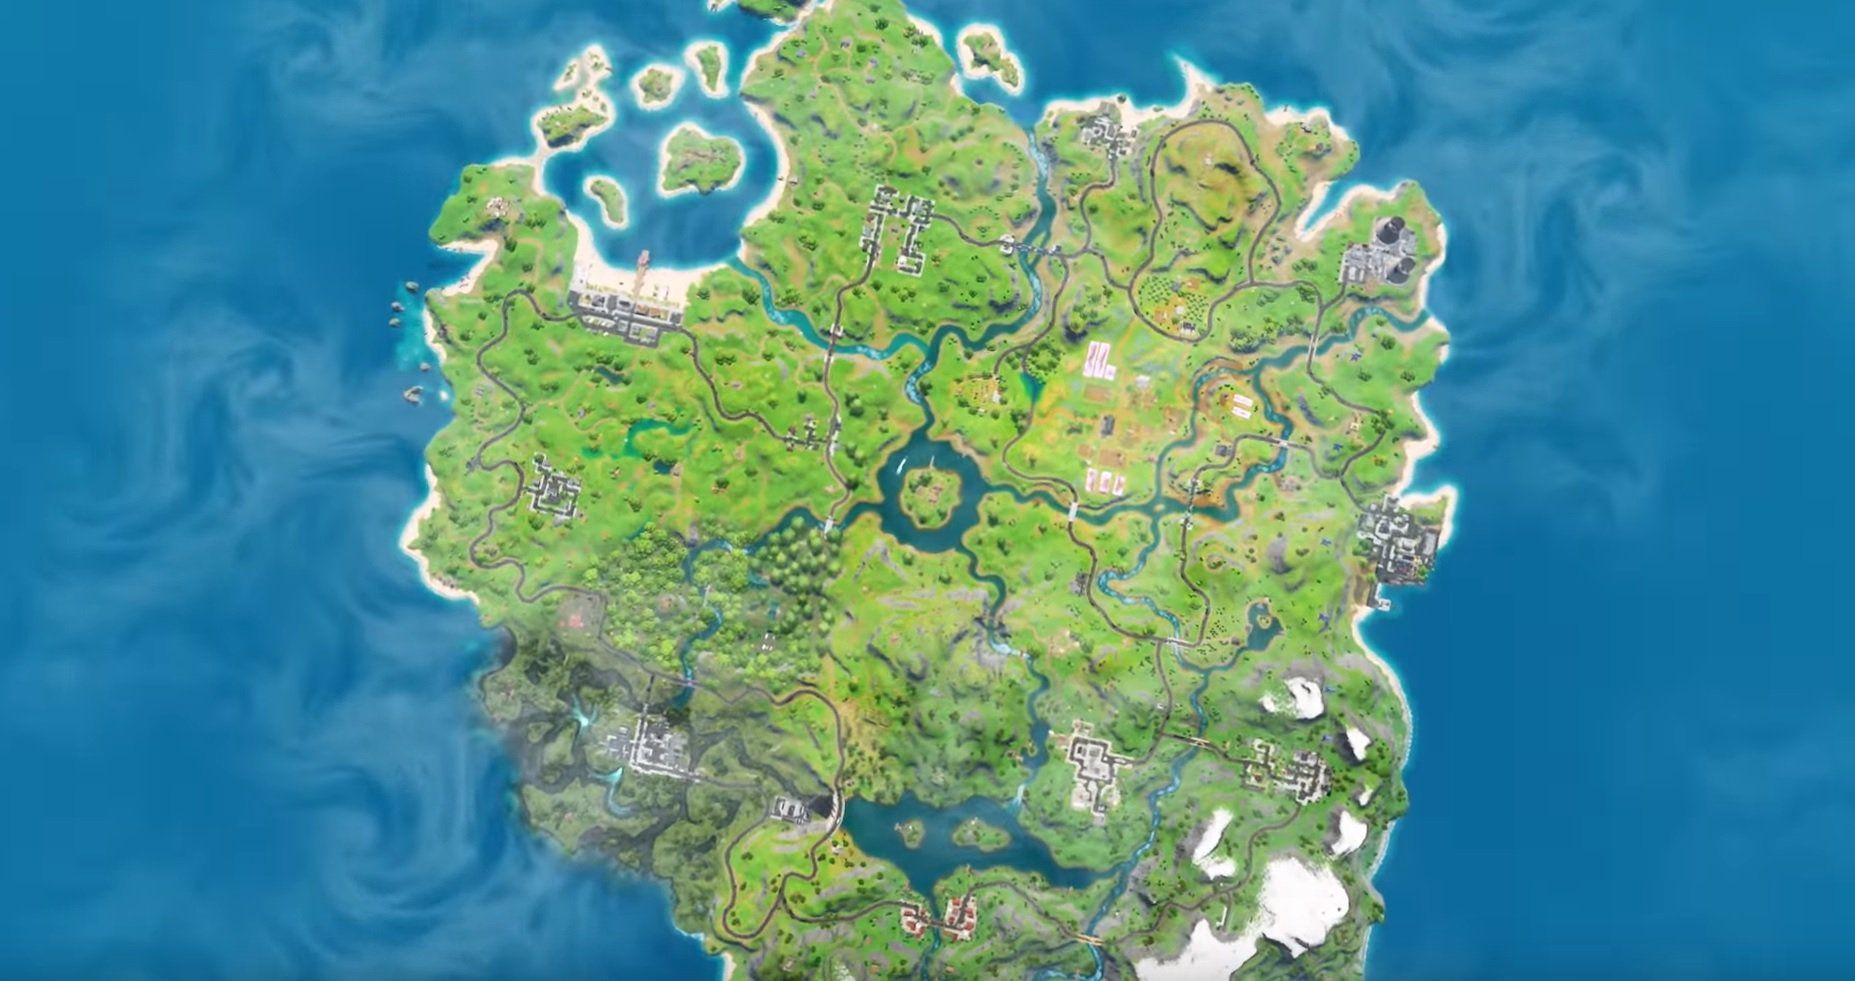 Fortnite came back, overhauls its entire map as 'Chapter 2' begins